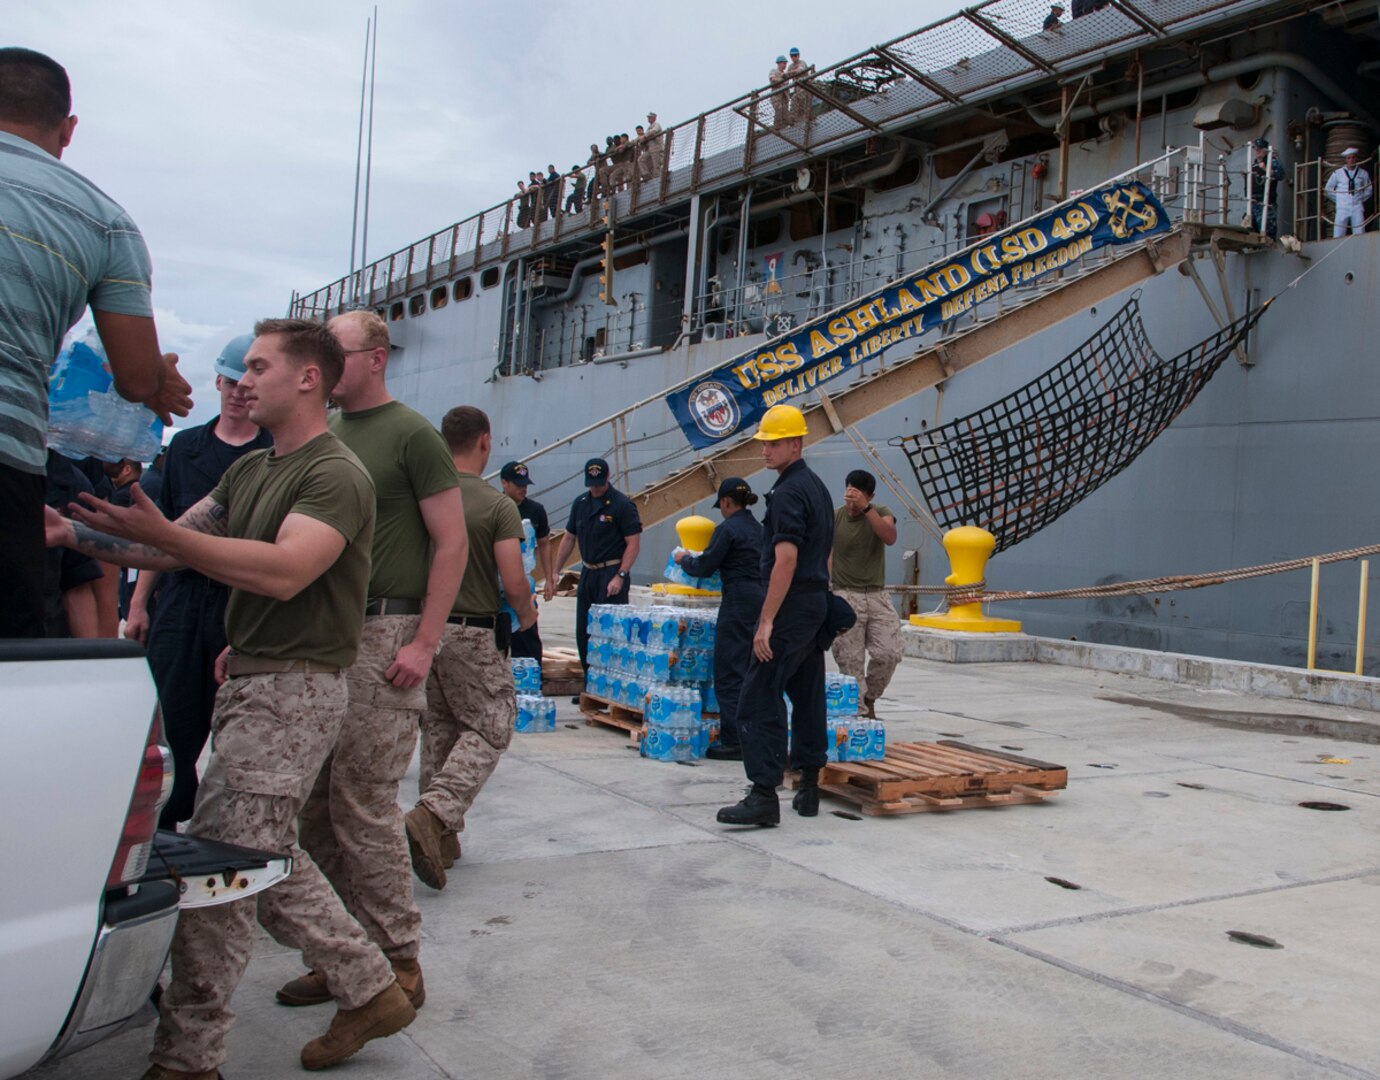 APRA HARBOR, Guam (Aug. 6, 2015) - Sailors and Marines load cases of water onto the amphibious dock landing ship USS Ashland (LSD 48) in preparation for the ship getting underway to deploy to Saipan. Ashland and embarked 31st Marine Expeditionary Unit (31st MEU) will provide relief in the aftermath of Typhoon Soudelor which devastated the island Aug. 2-3. 